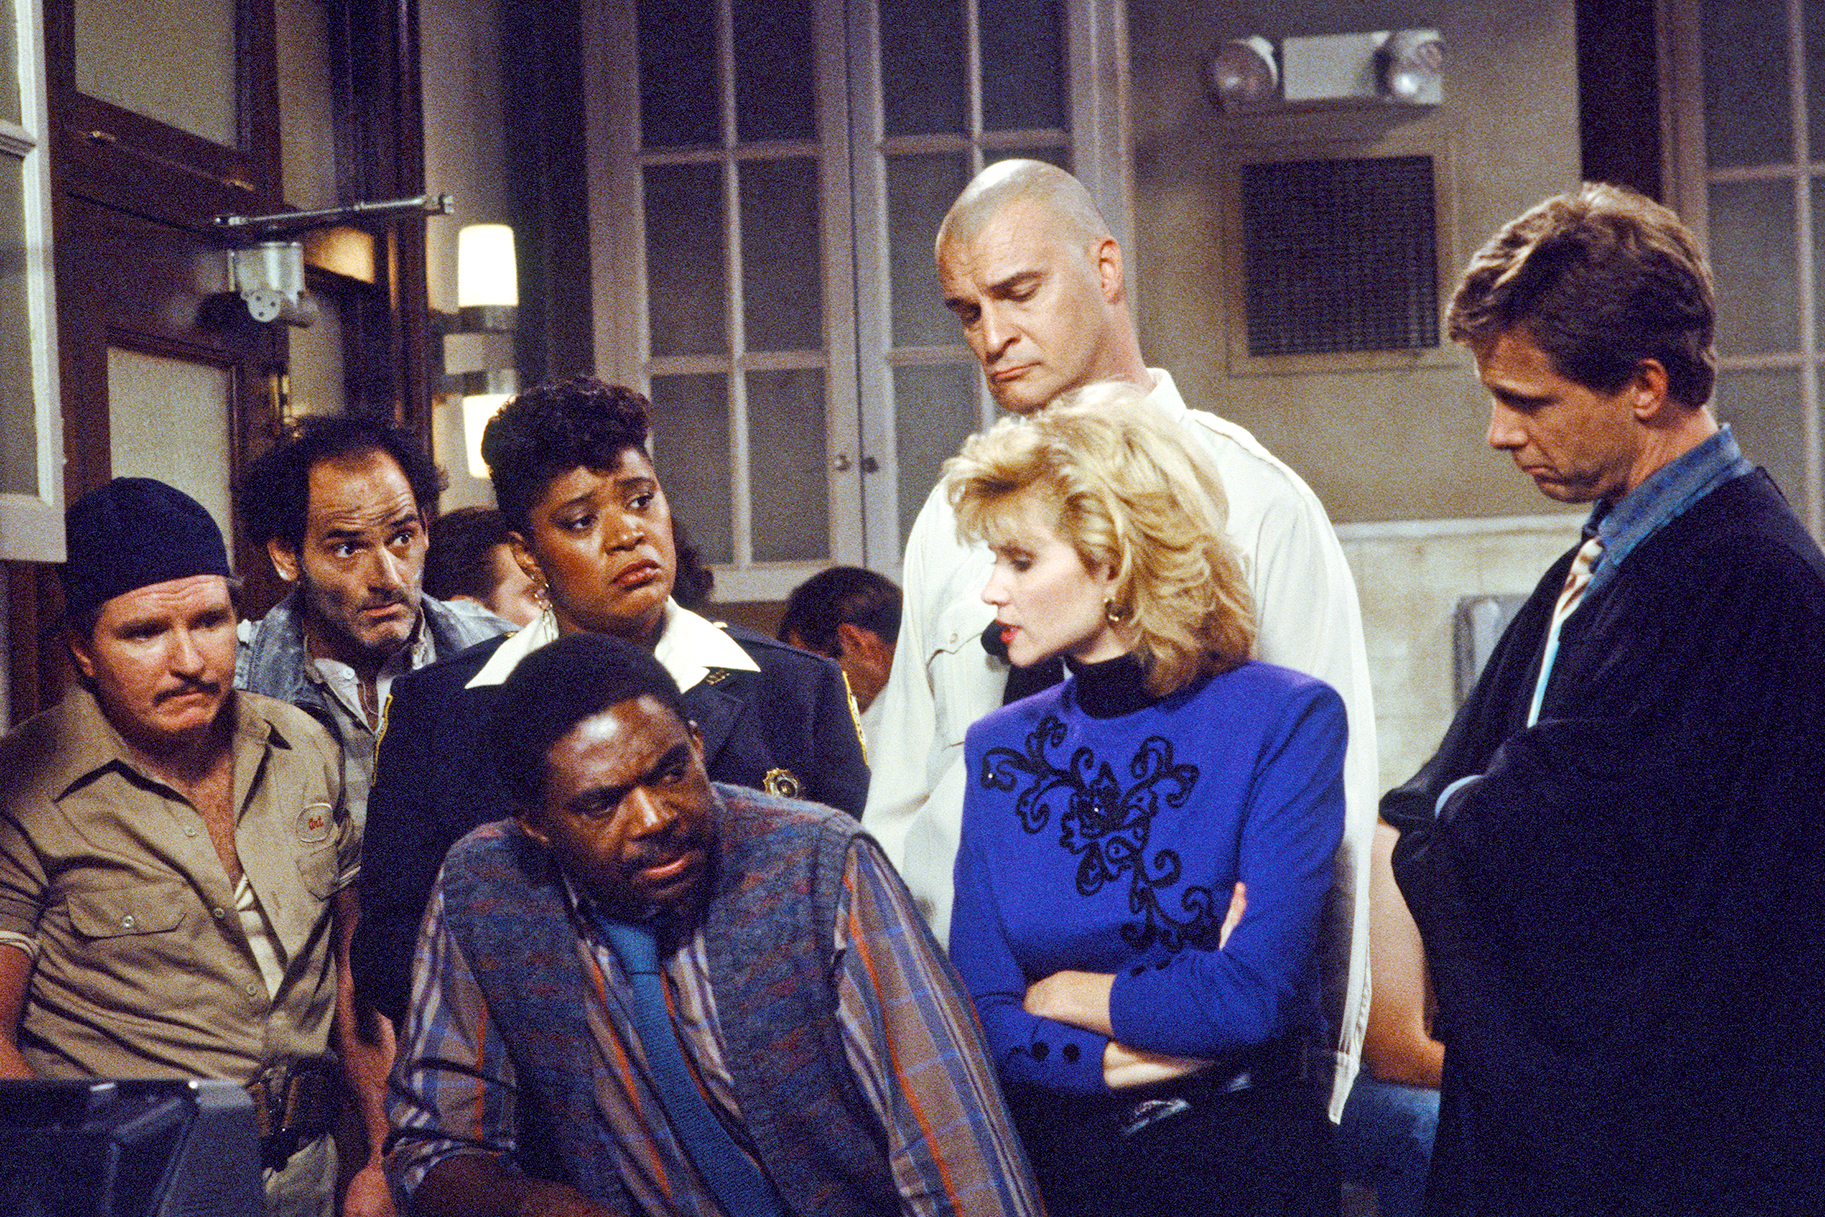 How to Watch and Stream the Original Night Court